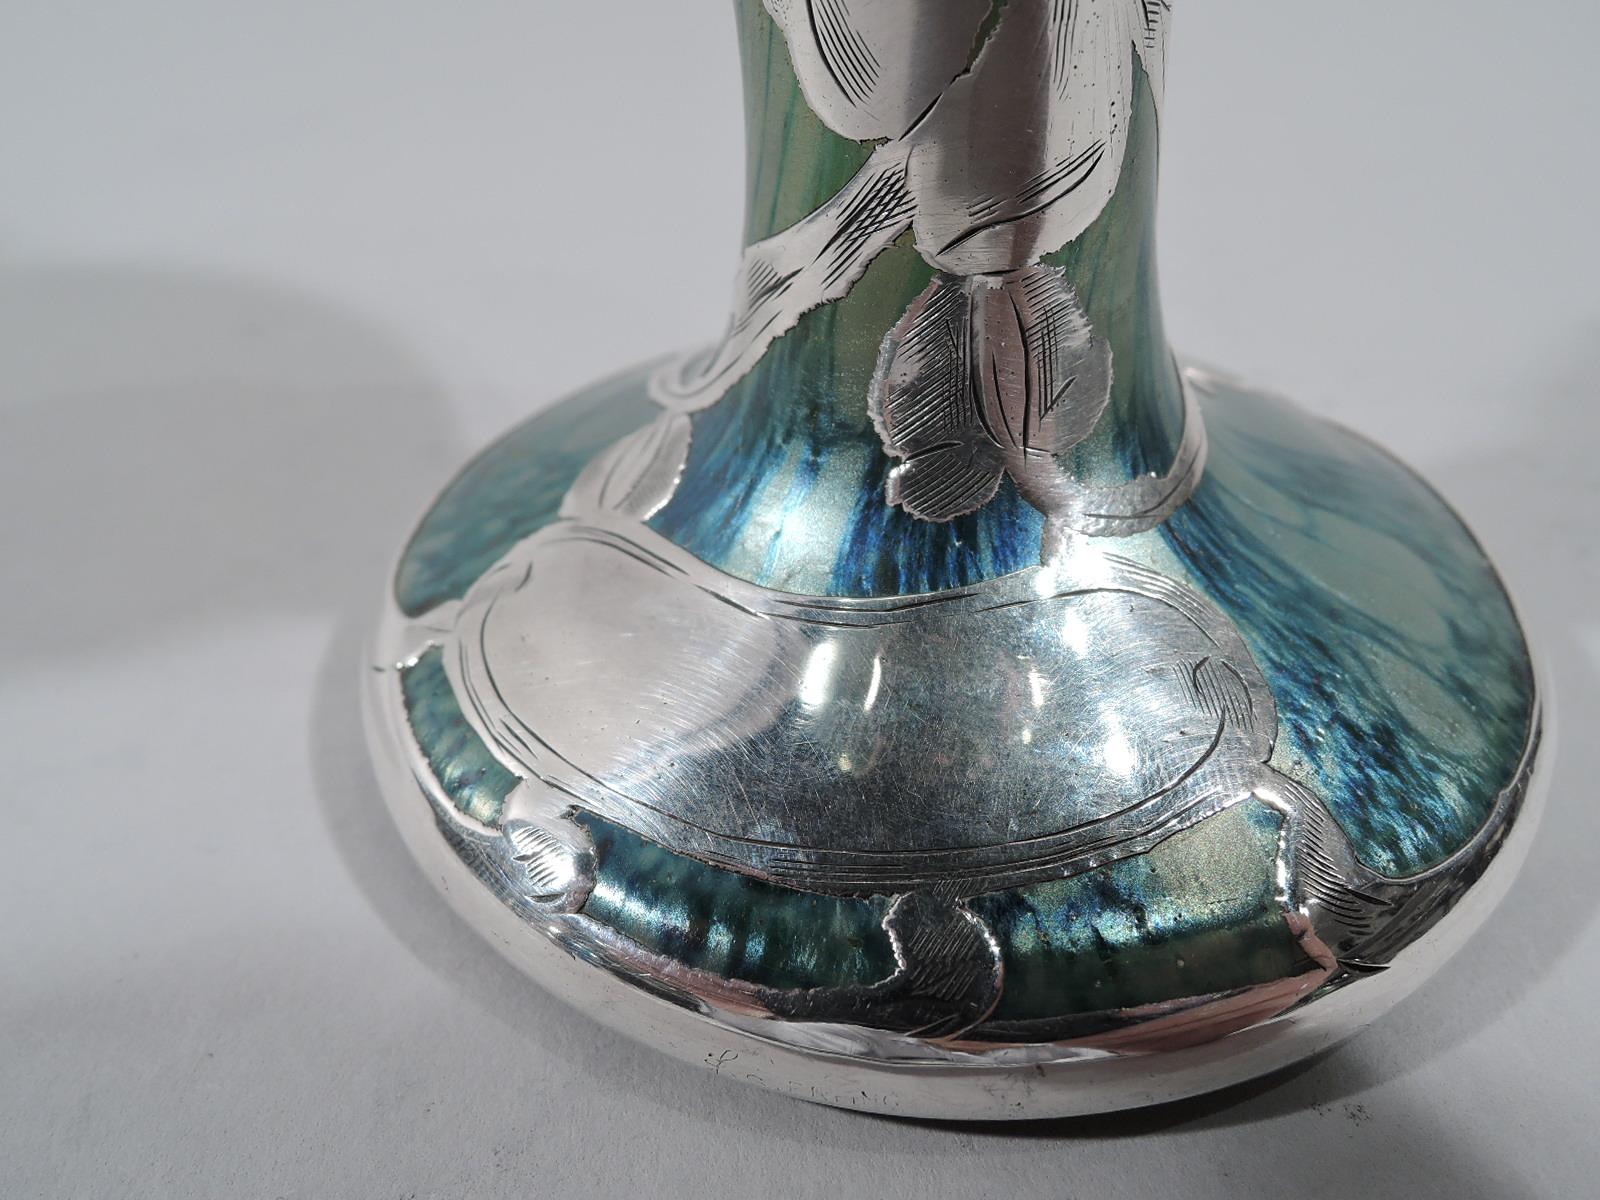 20th Century Art Nouveau Iridescent Green and Blue Glass Vase with Silver Overlay